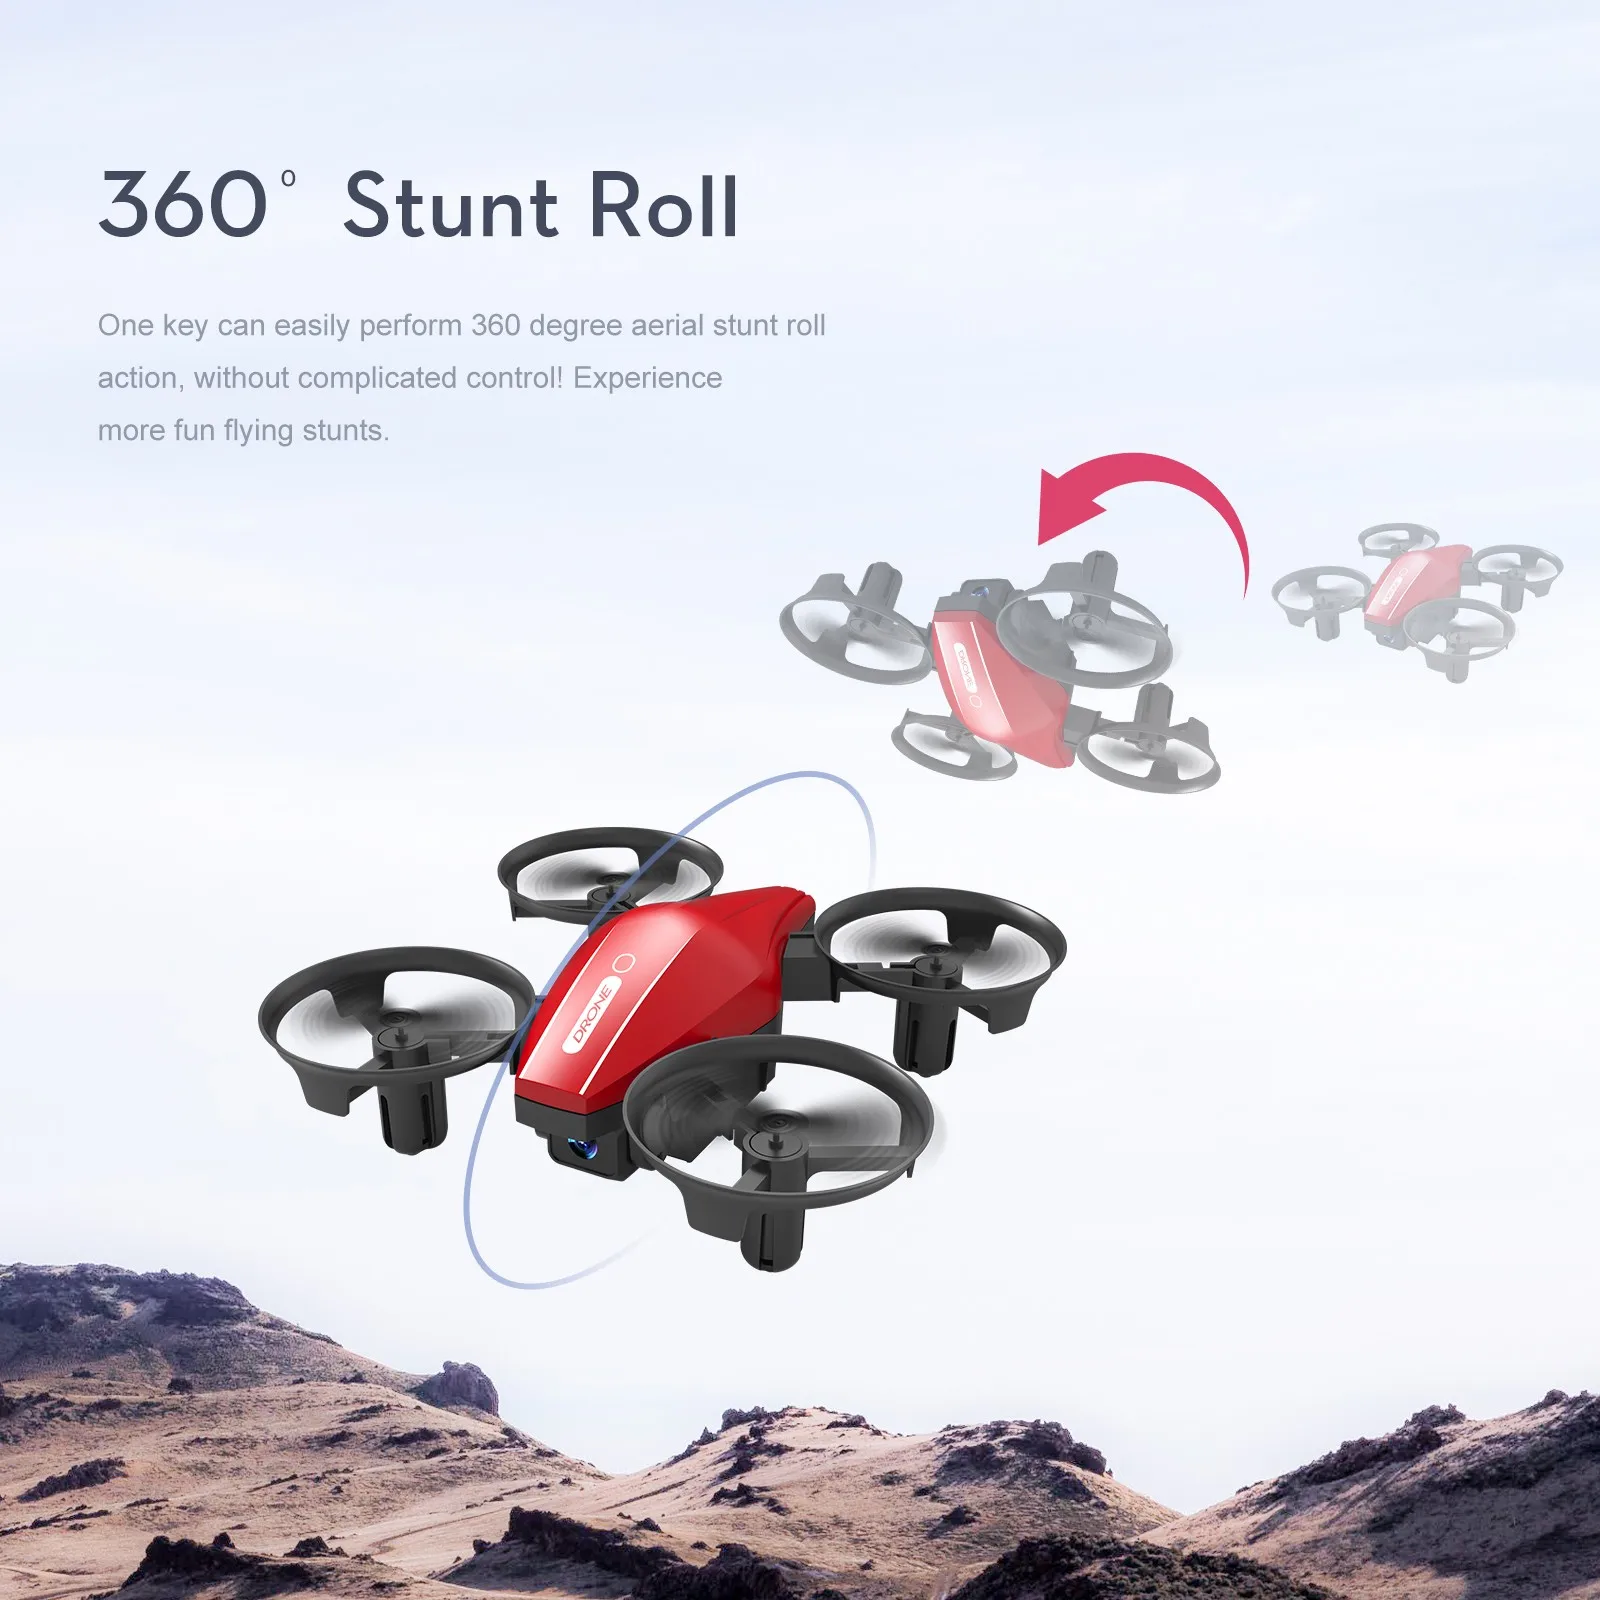 2023 New Gt1 Mini Drone 360° Air Rolling With Blade Protection 2.4g Quadcopter Children's Remote Control Airplane Toys Gift enlarge